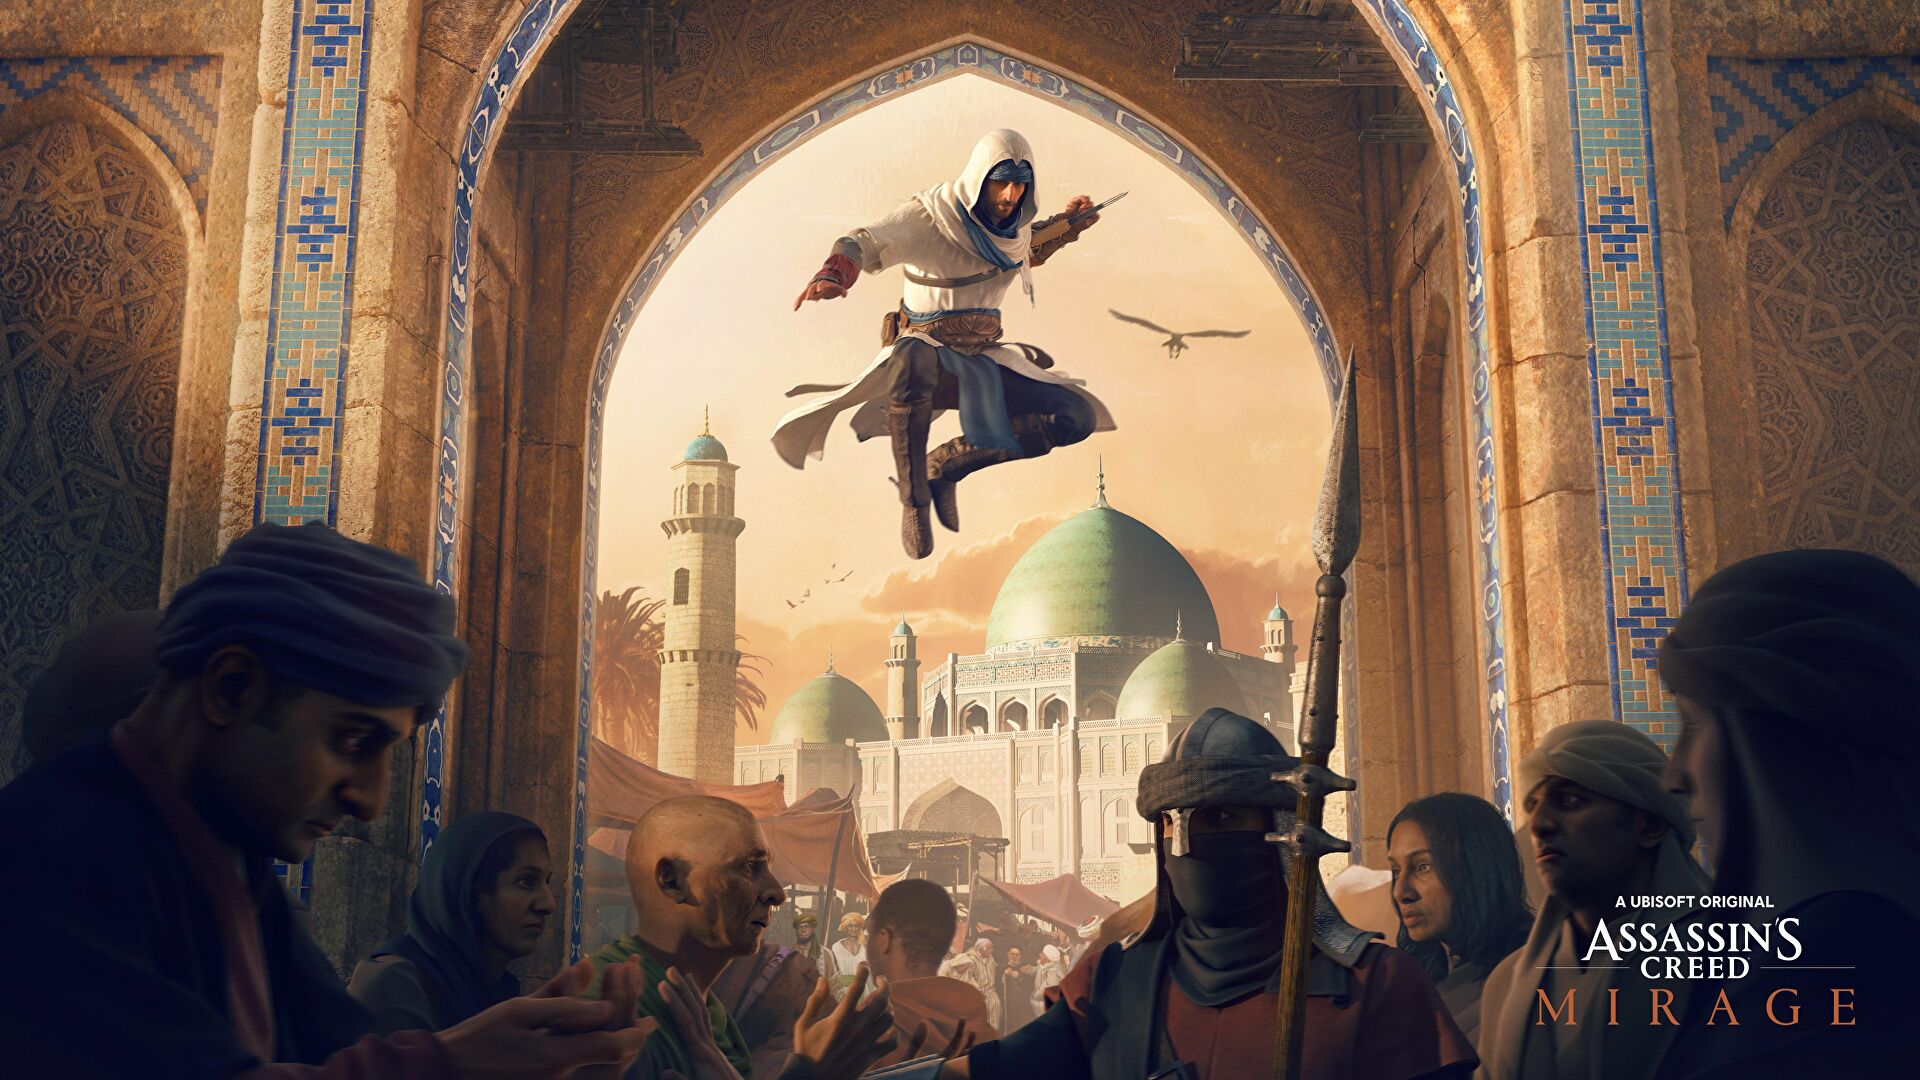 Video: Assassin’s Creed Mirage trailer